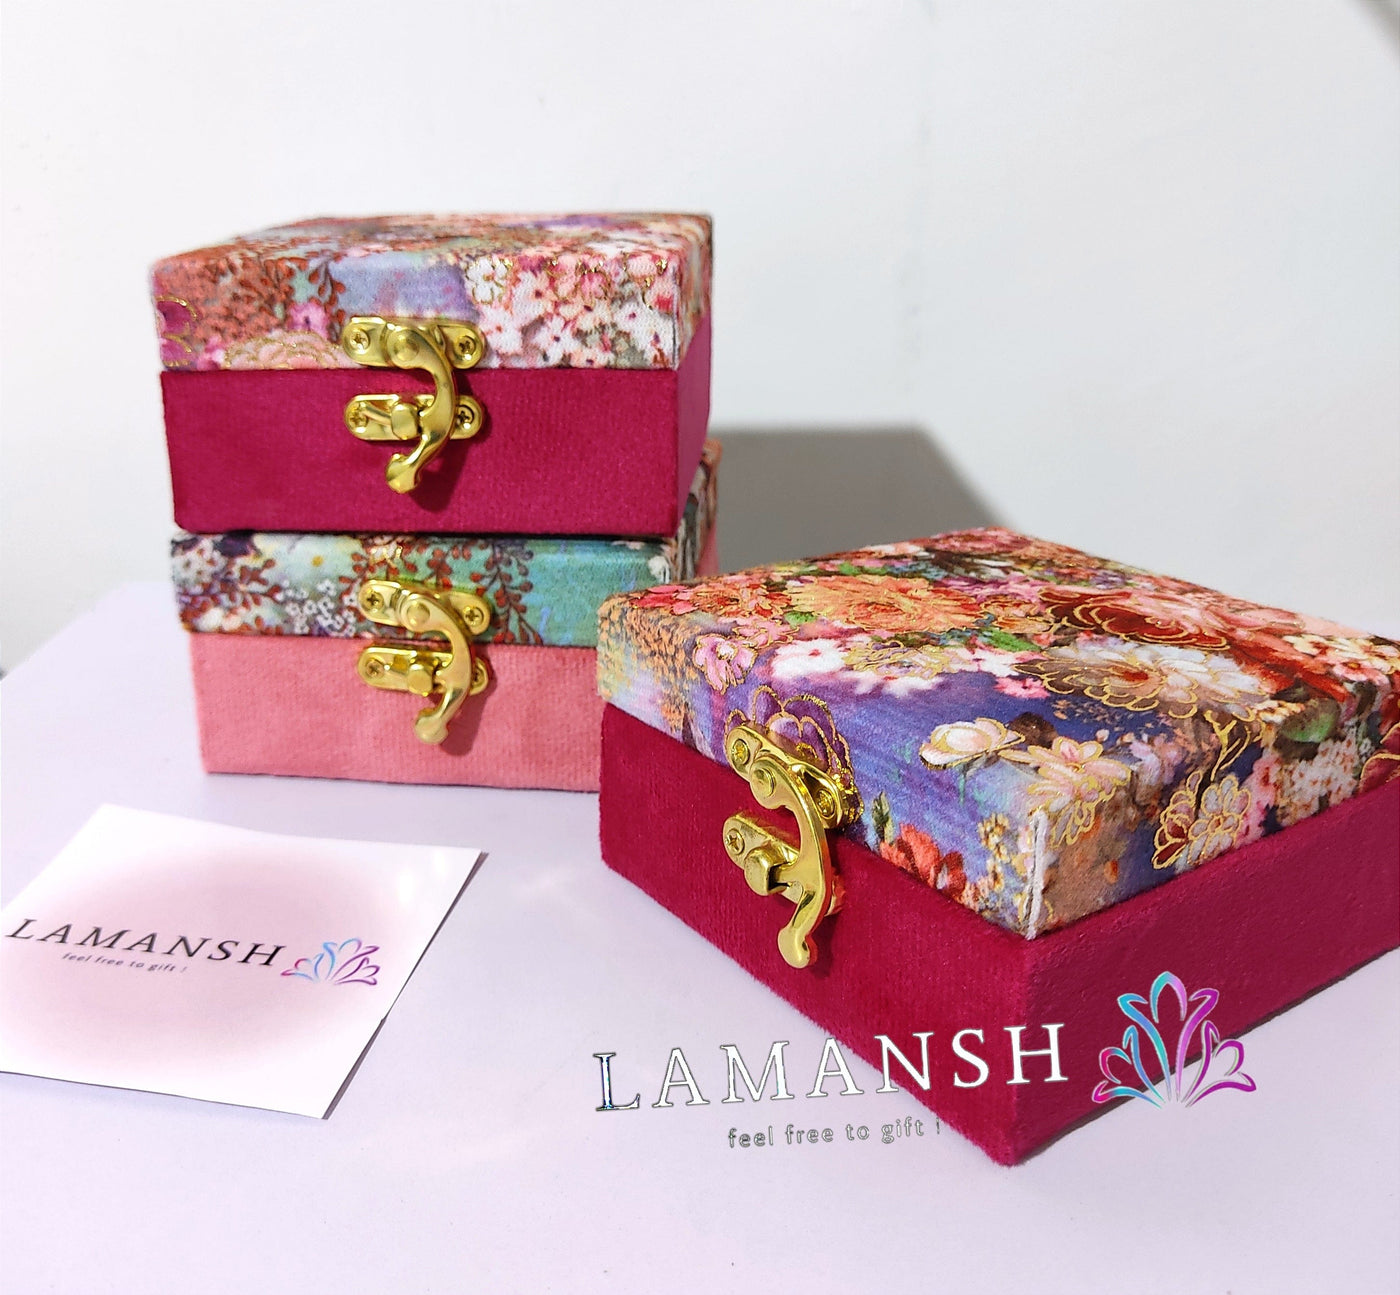 75 Rs each on buying 🏷in bulk Cash box LAMANSH® 4*4 inch Floral Printed Cash Gaddi boxes for Indian wedding Favors 🎁